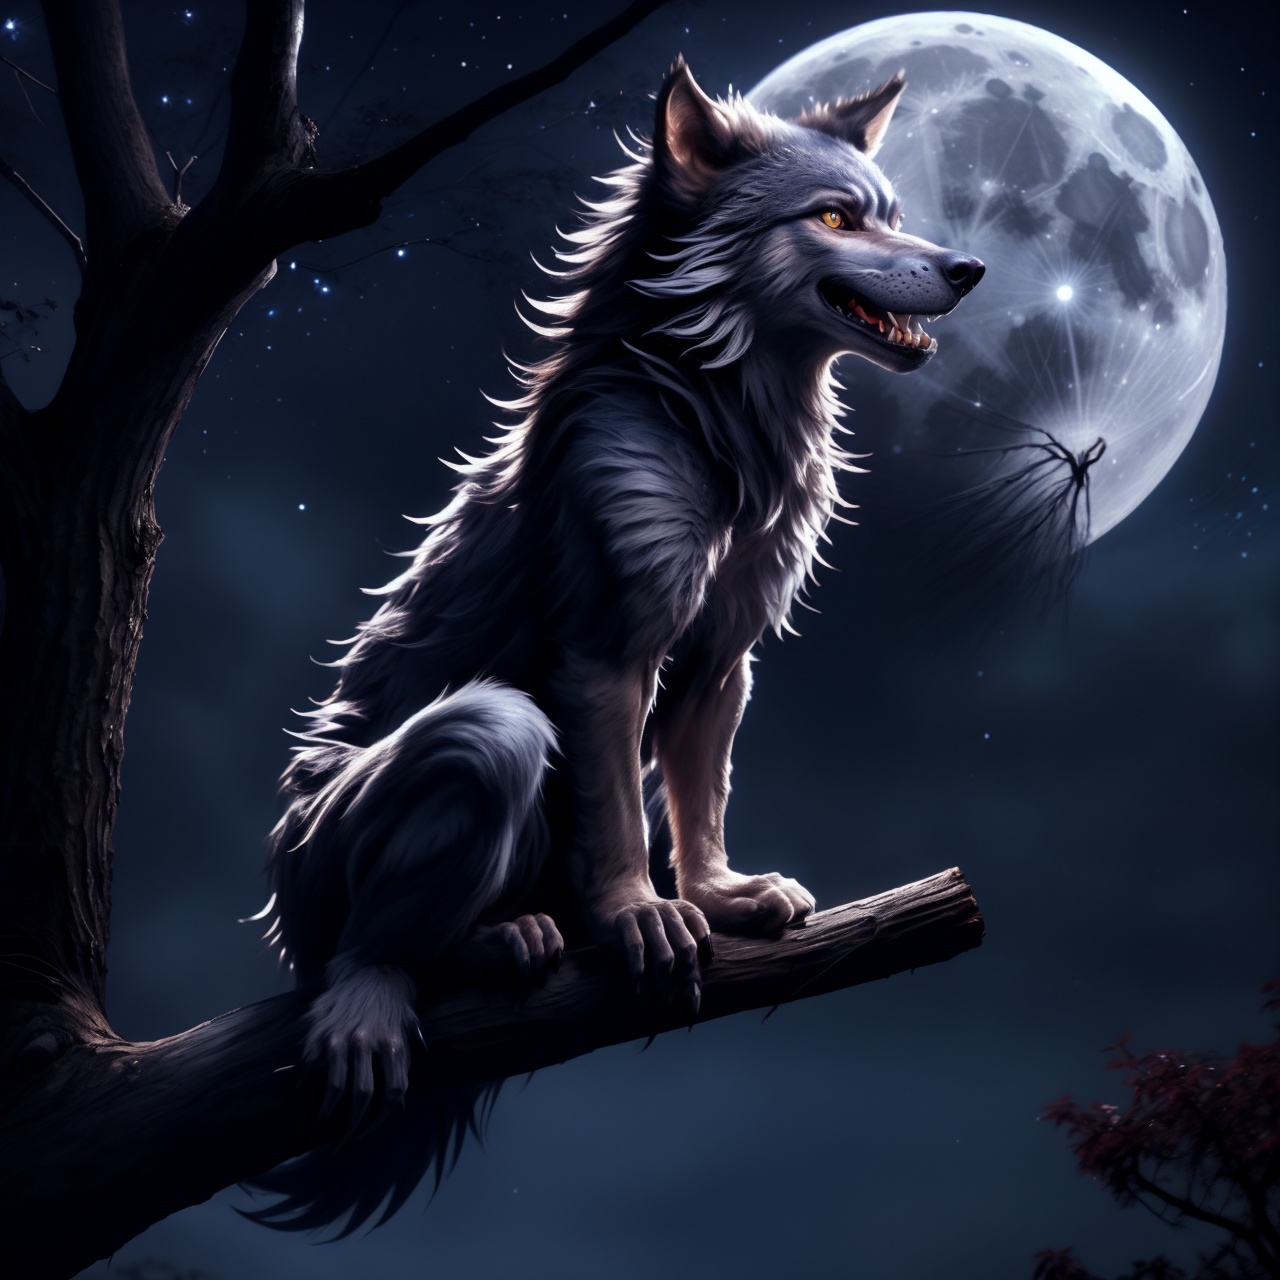 a werewolf perched on a tree limb with night sky and a full moon in the background, stars, full moon, bare limbs, realistic, intricate, highly detailed